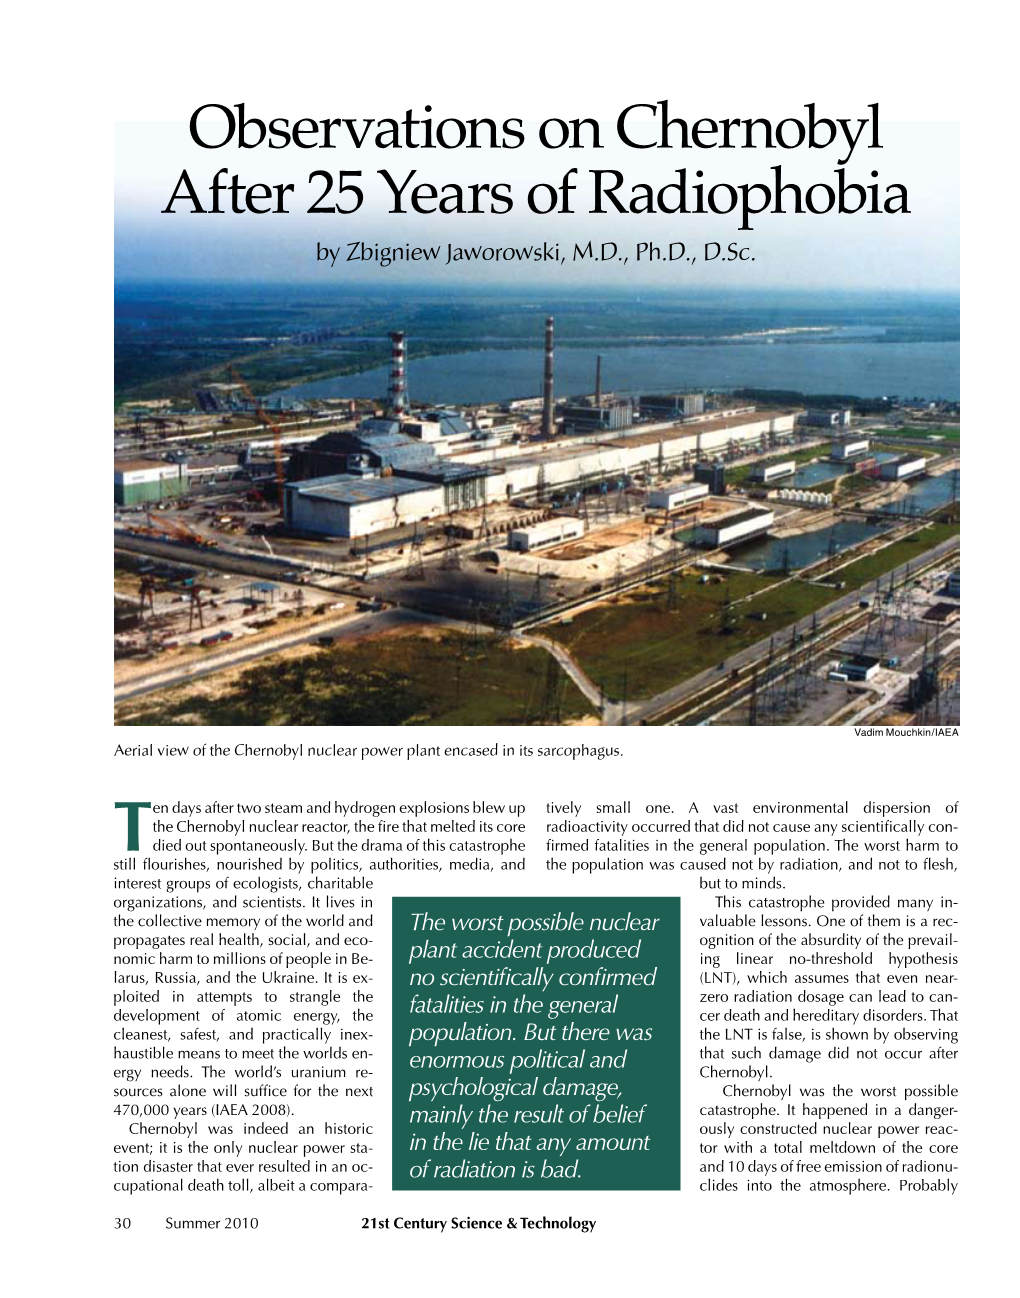 Observations on Chernobyl After 25 Years of Radiophobia by Zbigniew Jaworowski, M.D., Ph.D., D.Sc